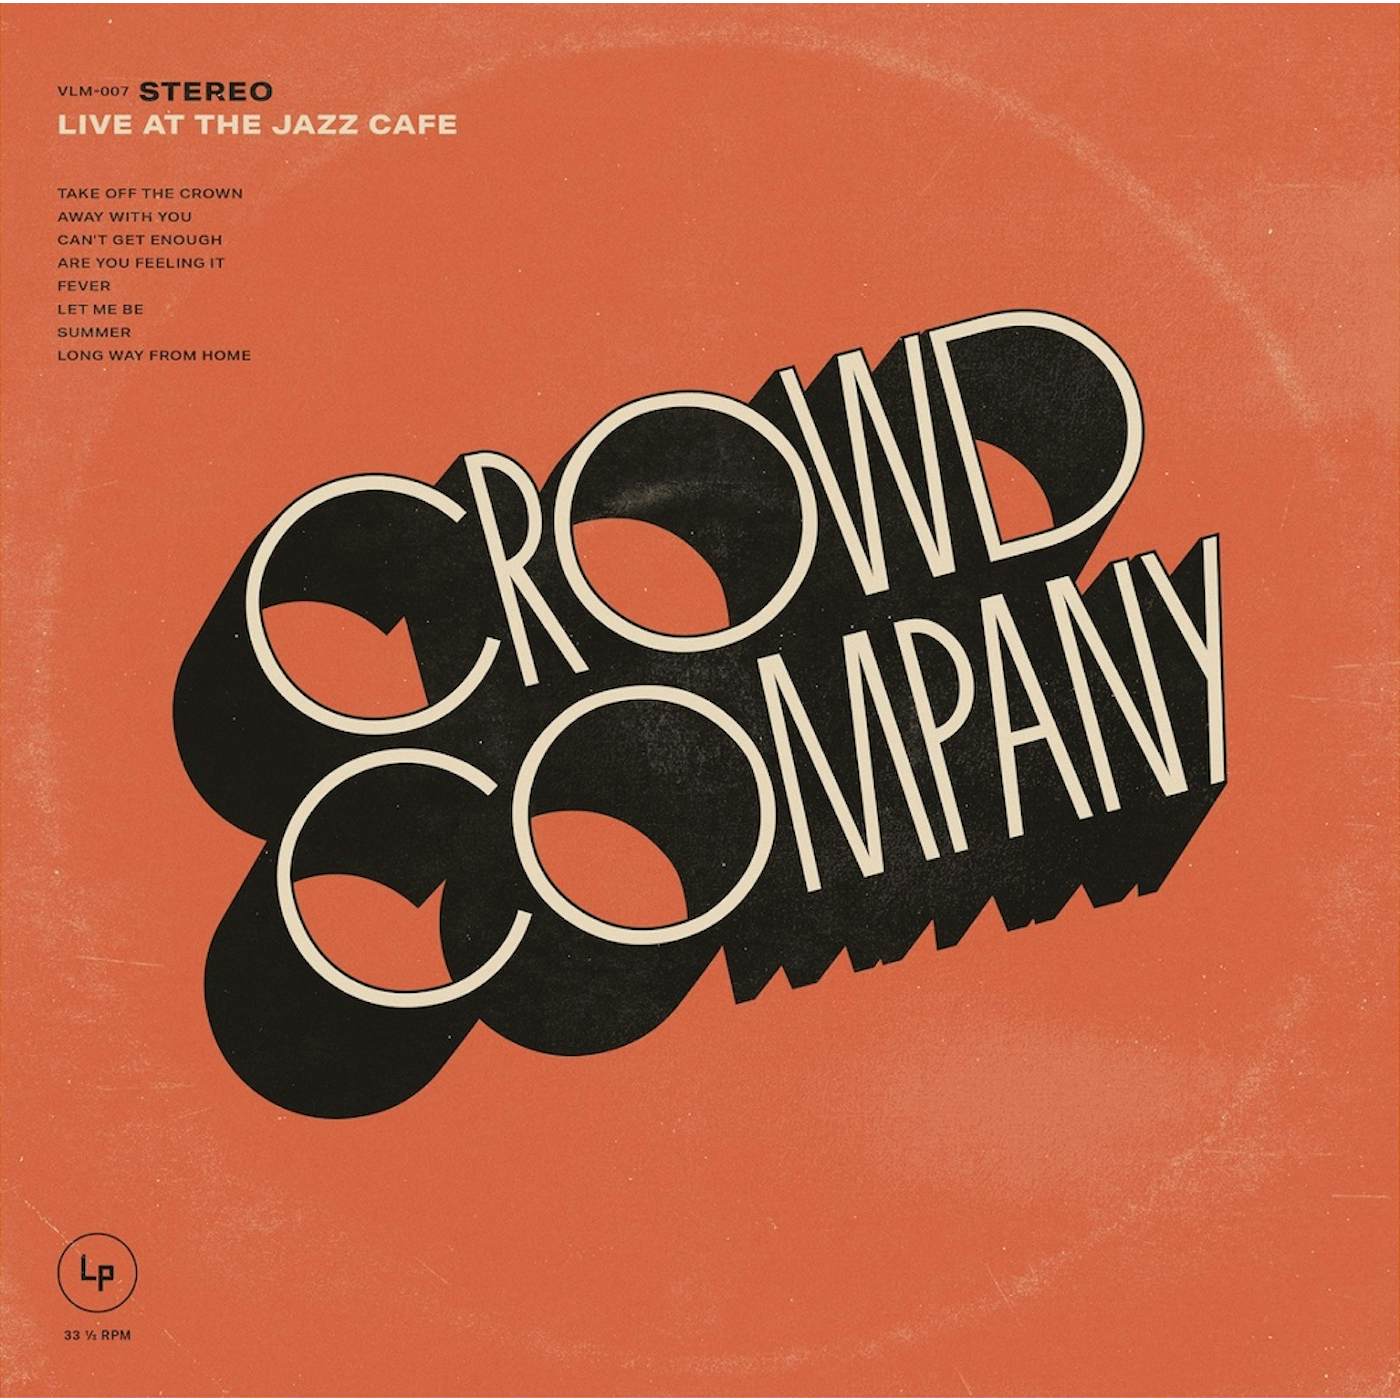 Crowd Company Live at the Jazz Cafe Vinyl Record